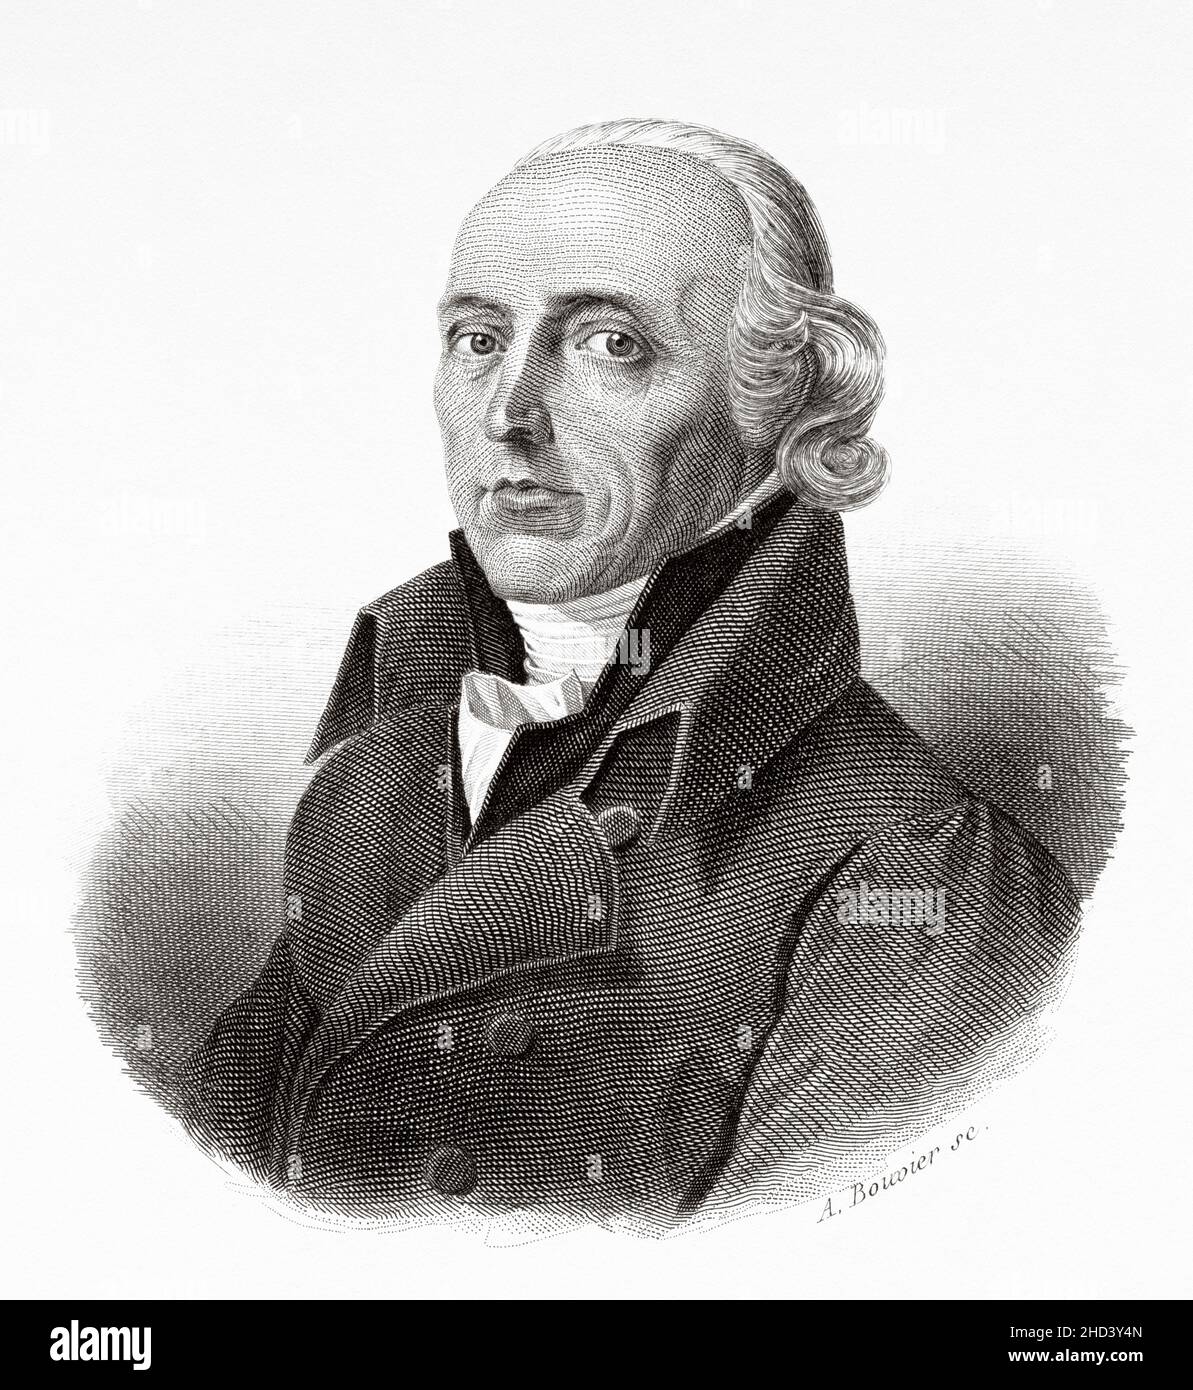 Hans Conrad Escher von der Linth (1767-1823) was a Swiss scientist, artist, and politician. He headed the Great Council of Switzerland in 1798. Europe. Old 19th century engraved illustration from Portraits et histoire des hommes utile by Societe Montyon et Franklin 1837 Stock Photo